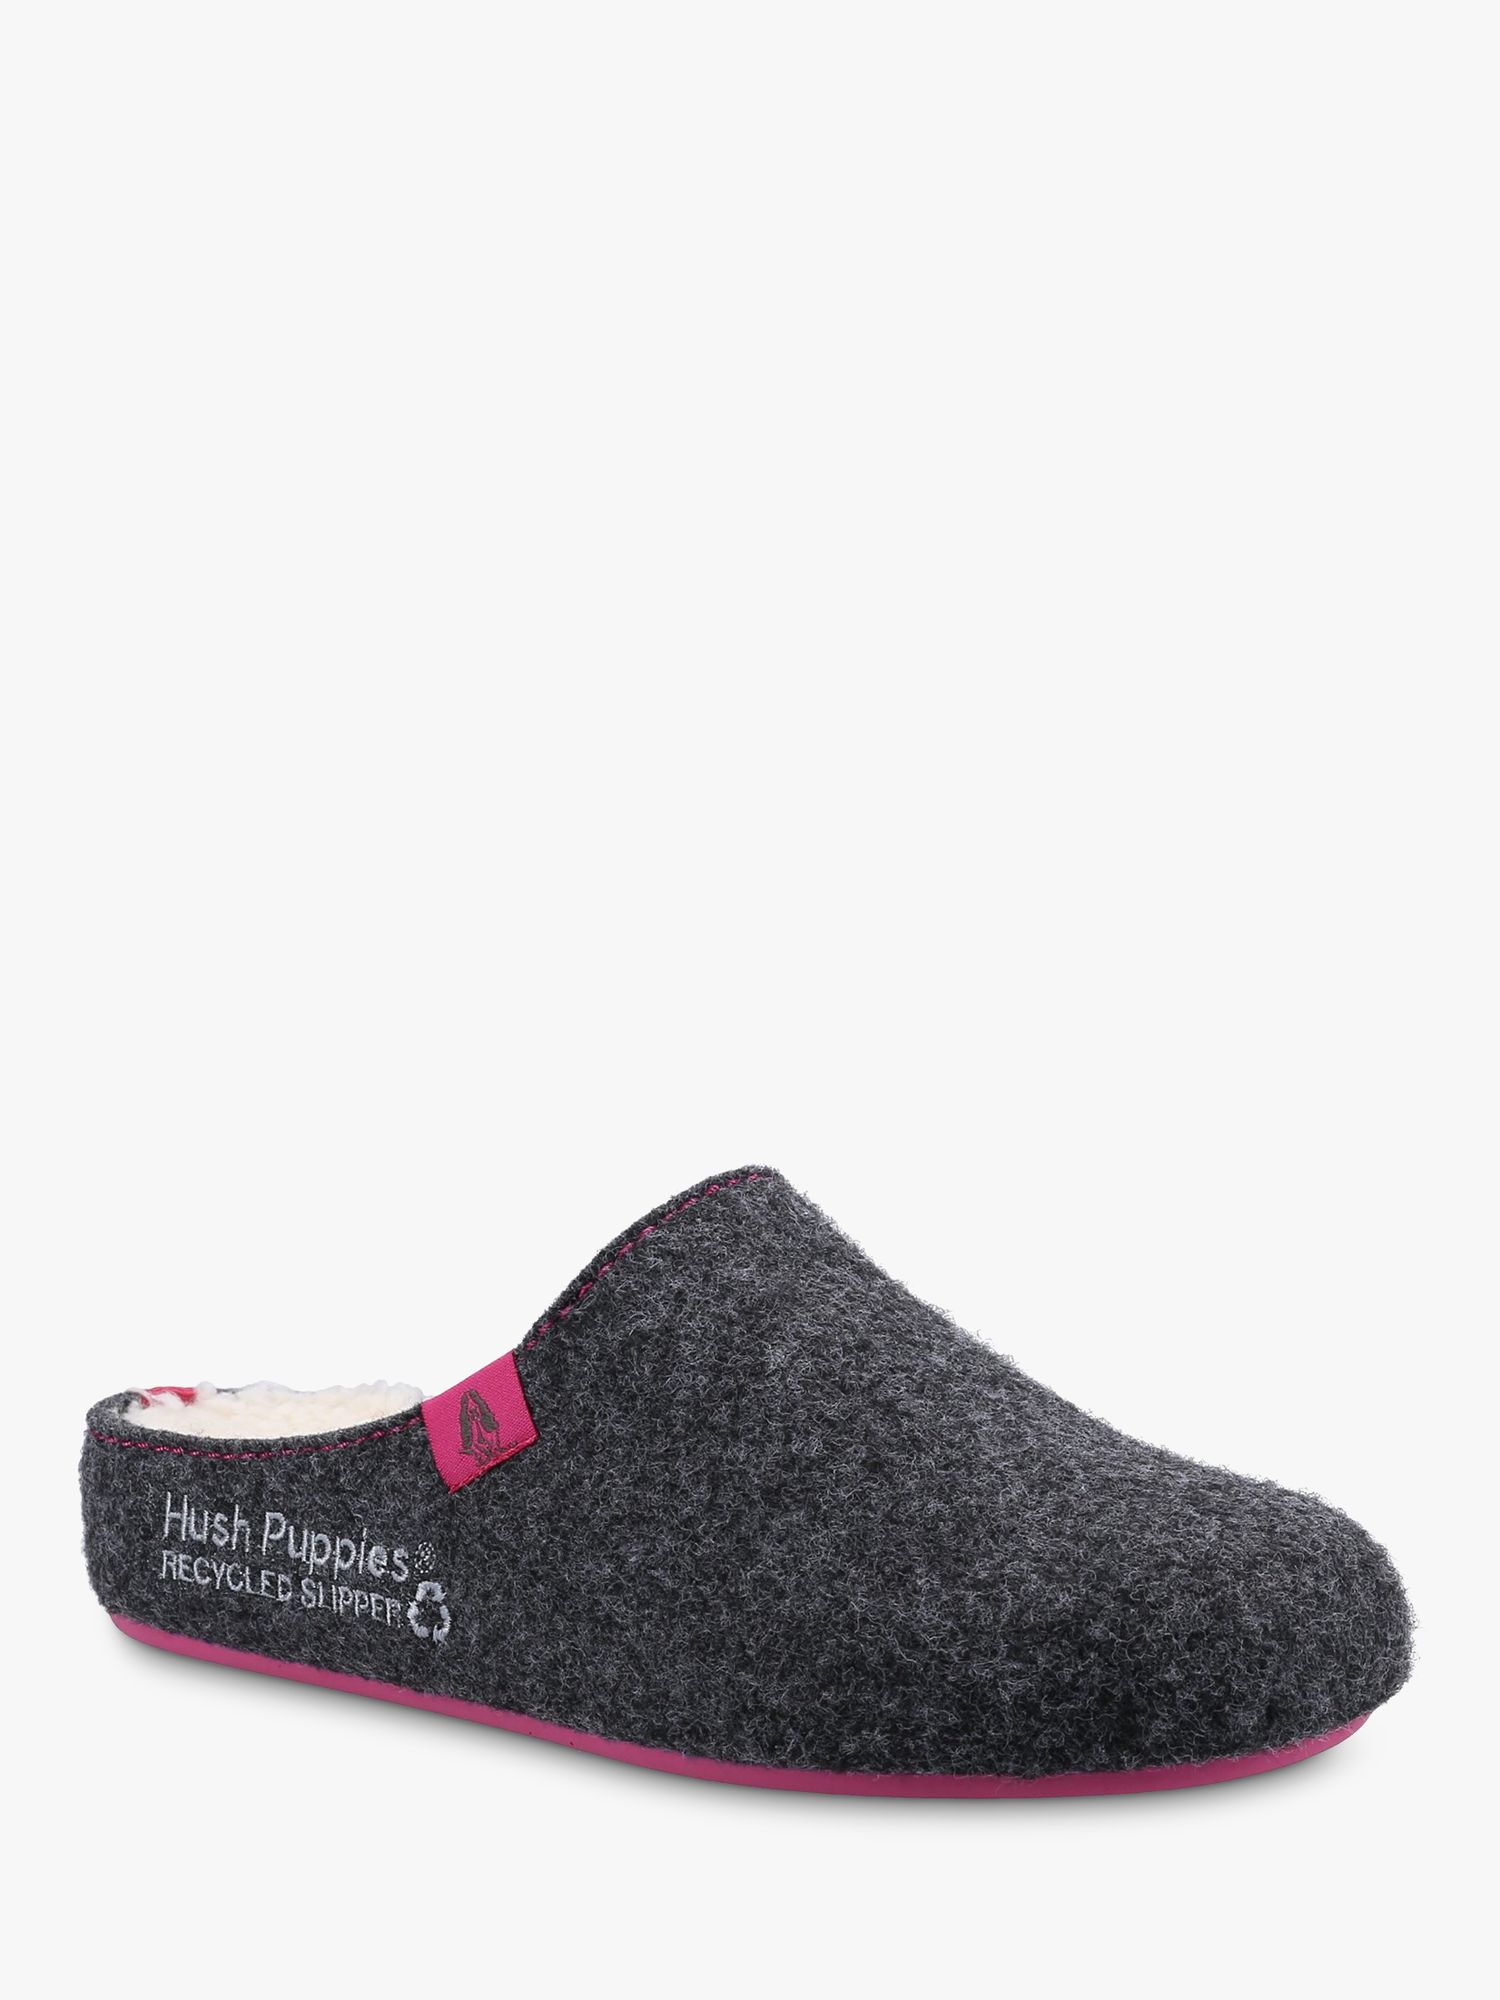 Buy Hush Puppies The Good Mule Slippers, Charcoal Online at johnlewis.com